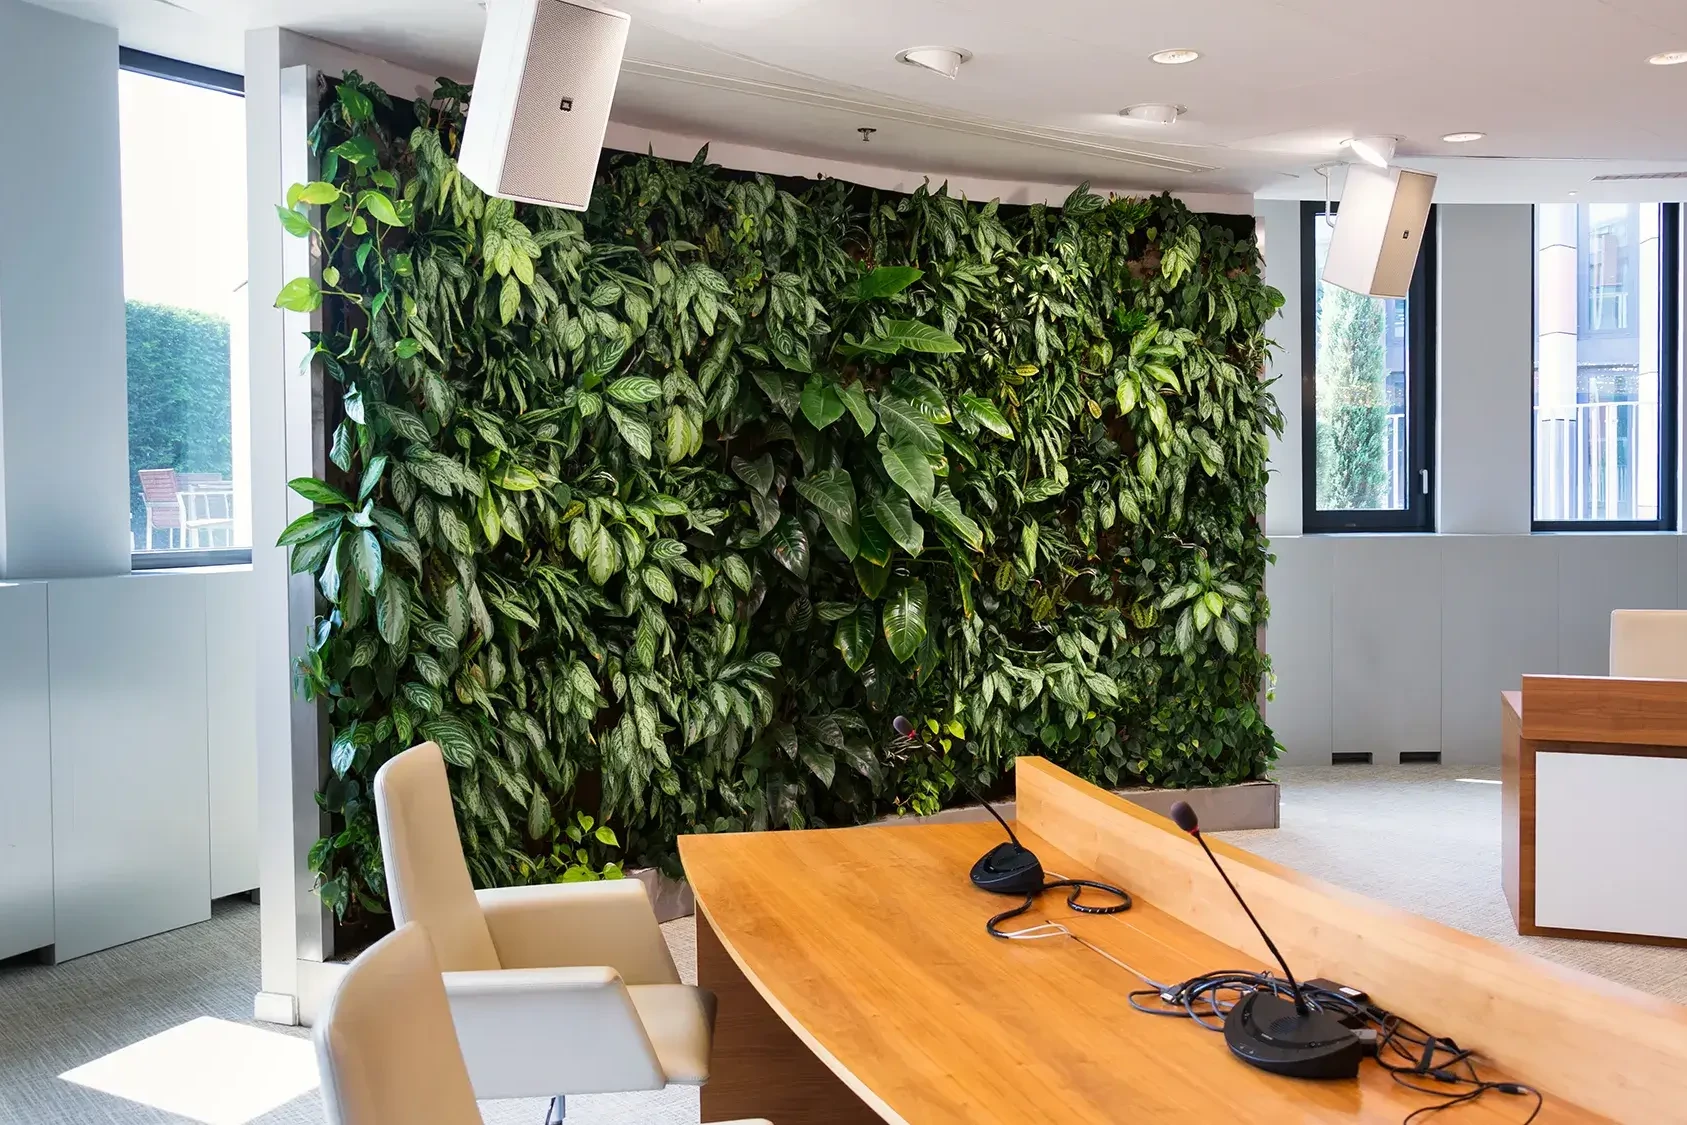 Large green living wall in office conference room